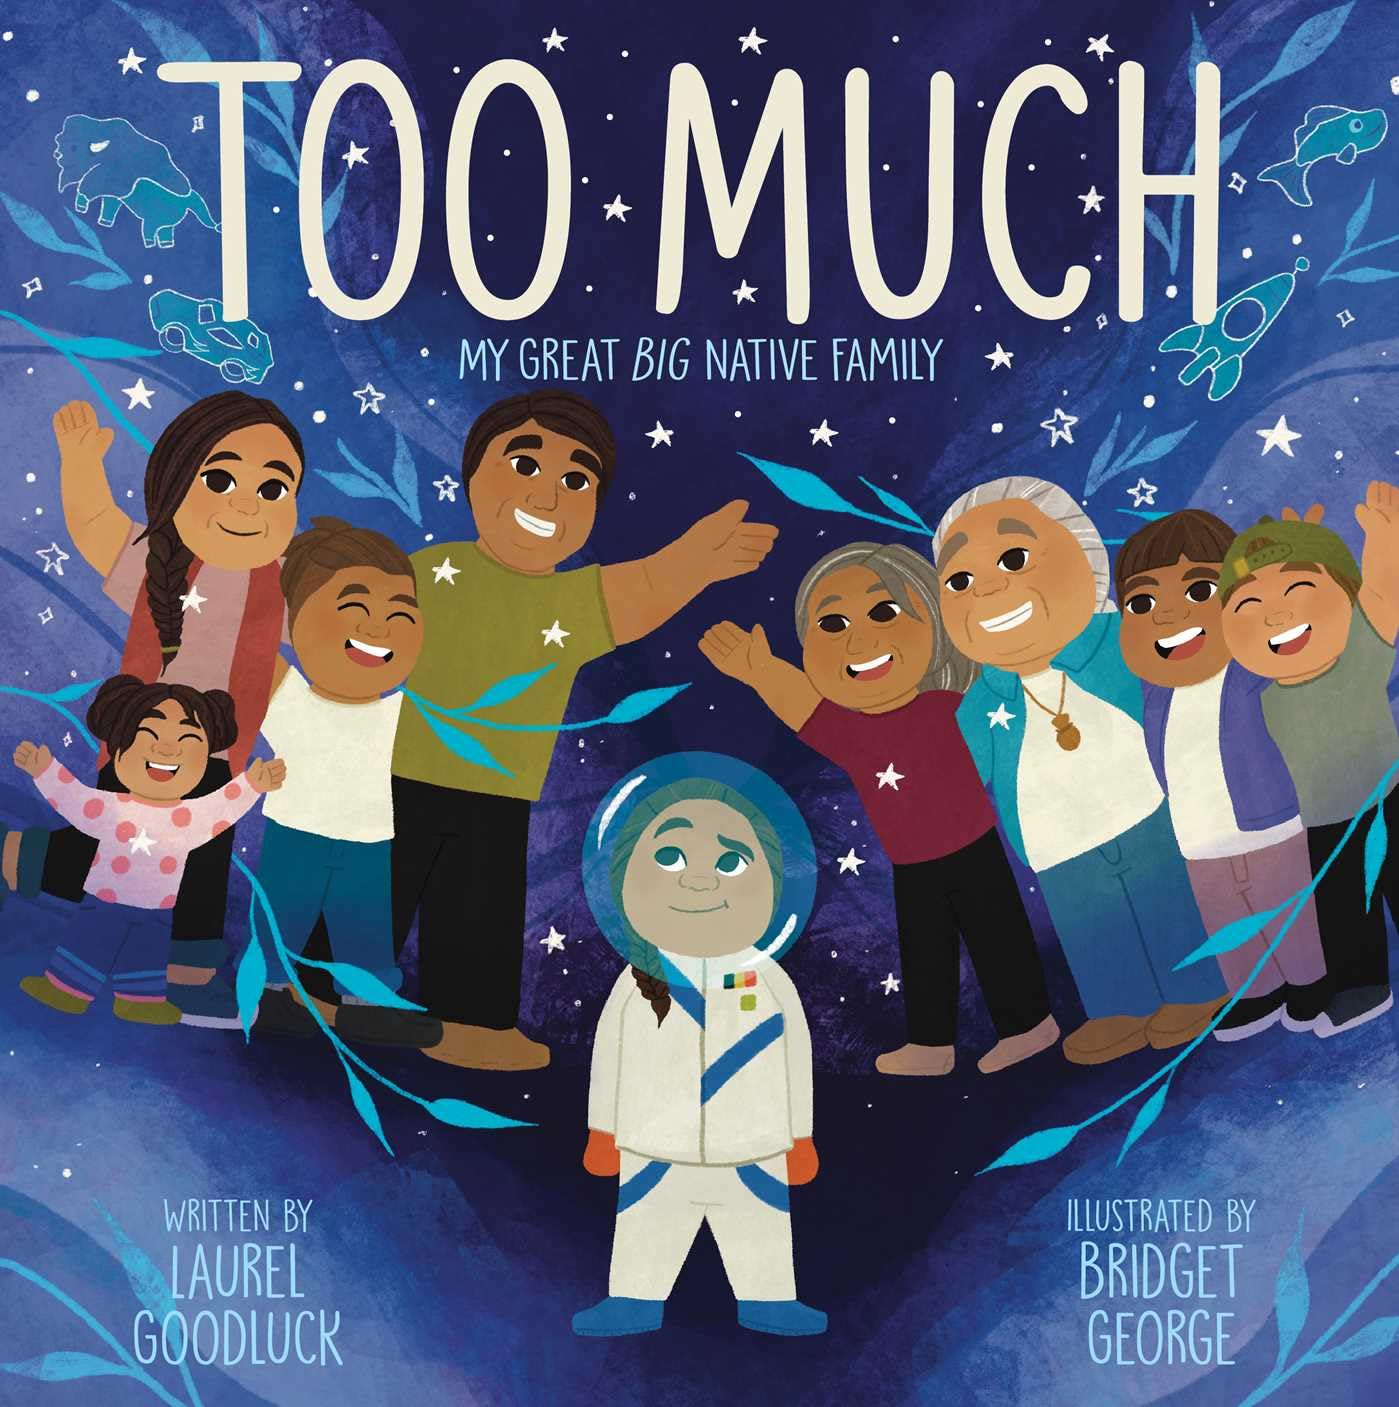 Image for "Too Much"